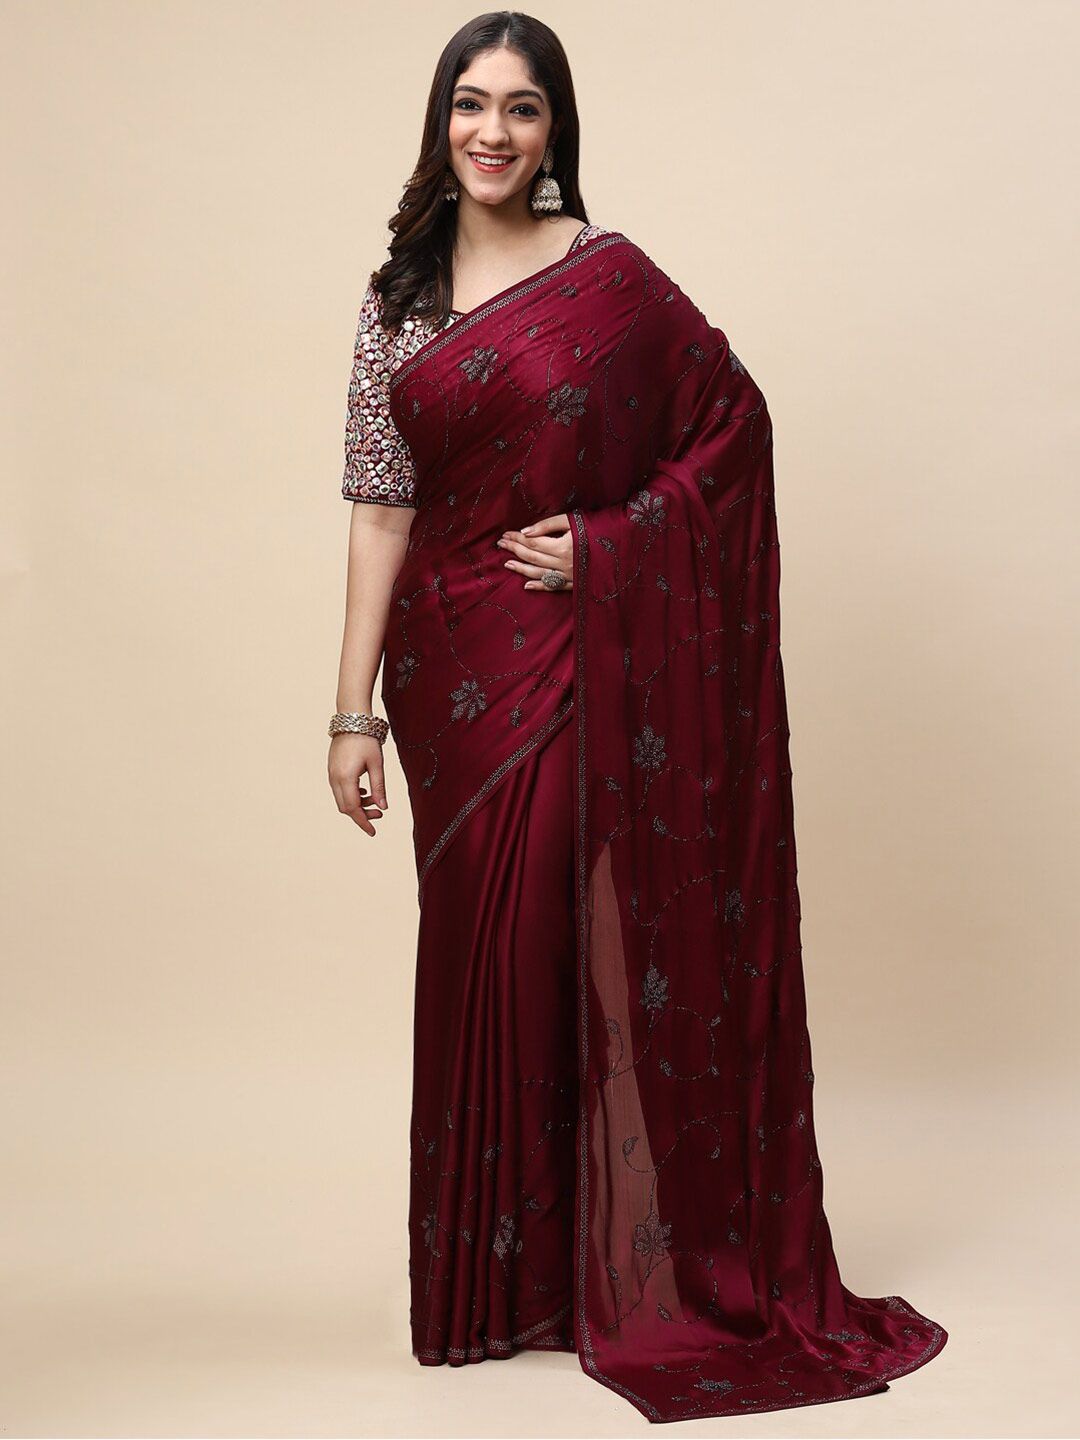 Meena Bazaar Burgundy & Silver-Toned Floral Beads and Stones Satin Saree Price in India